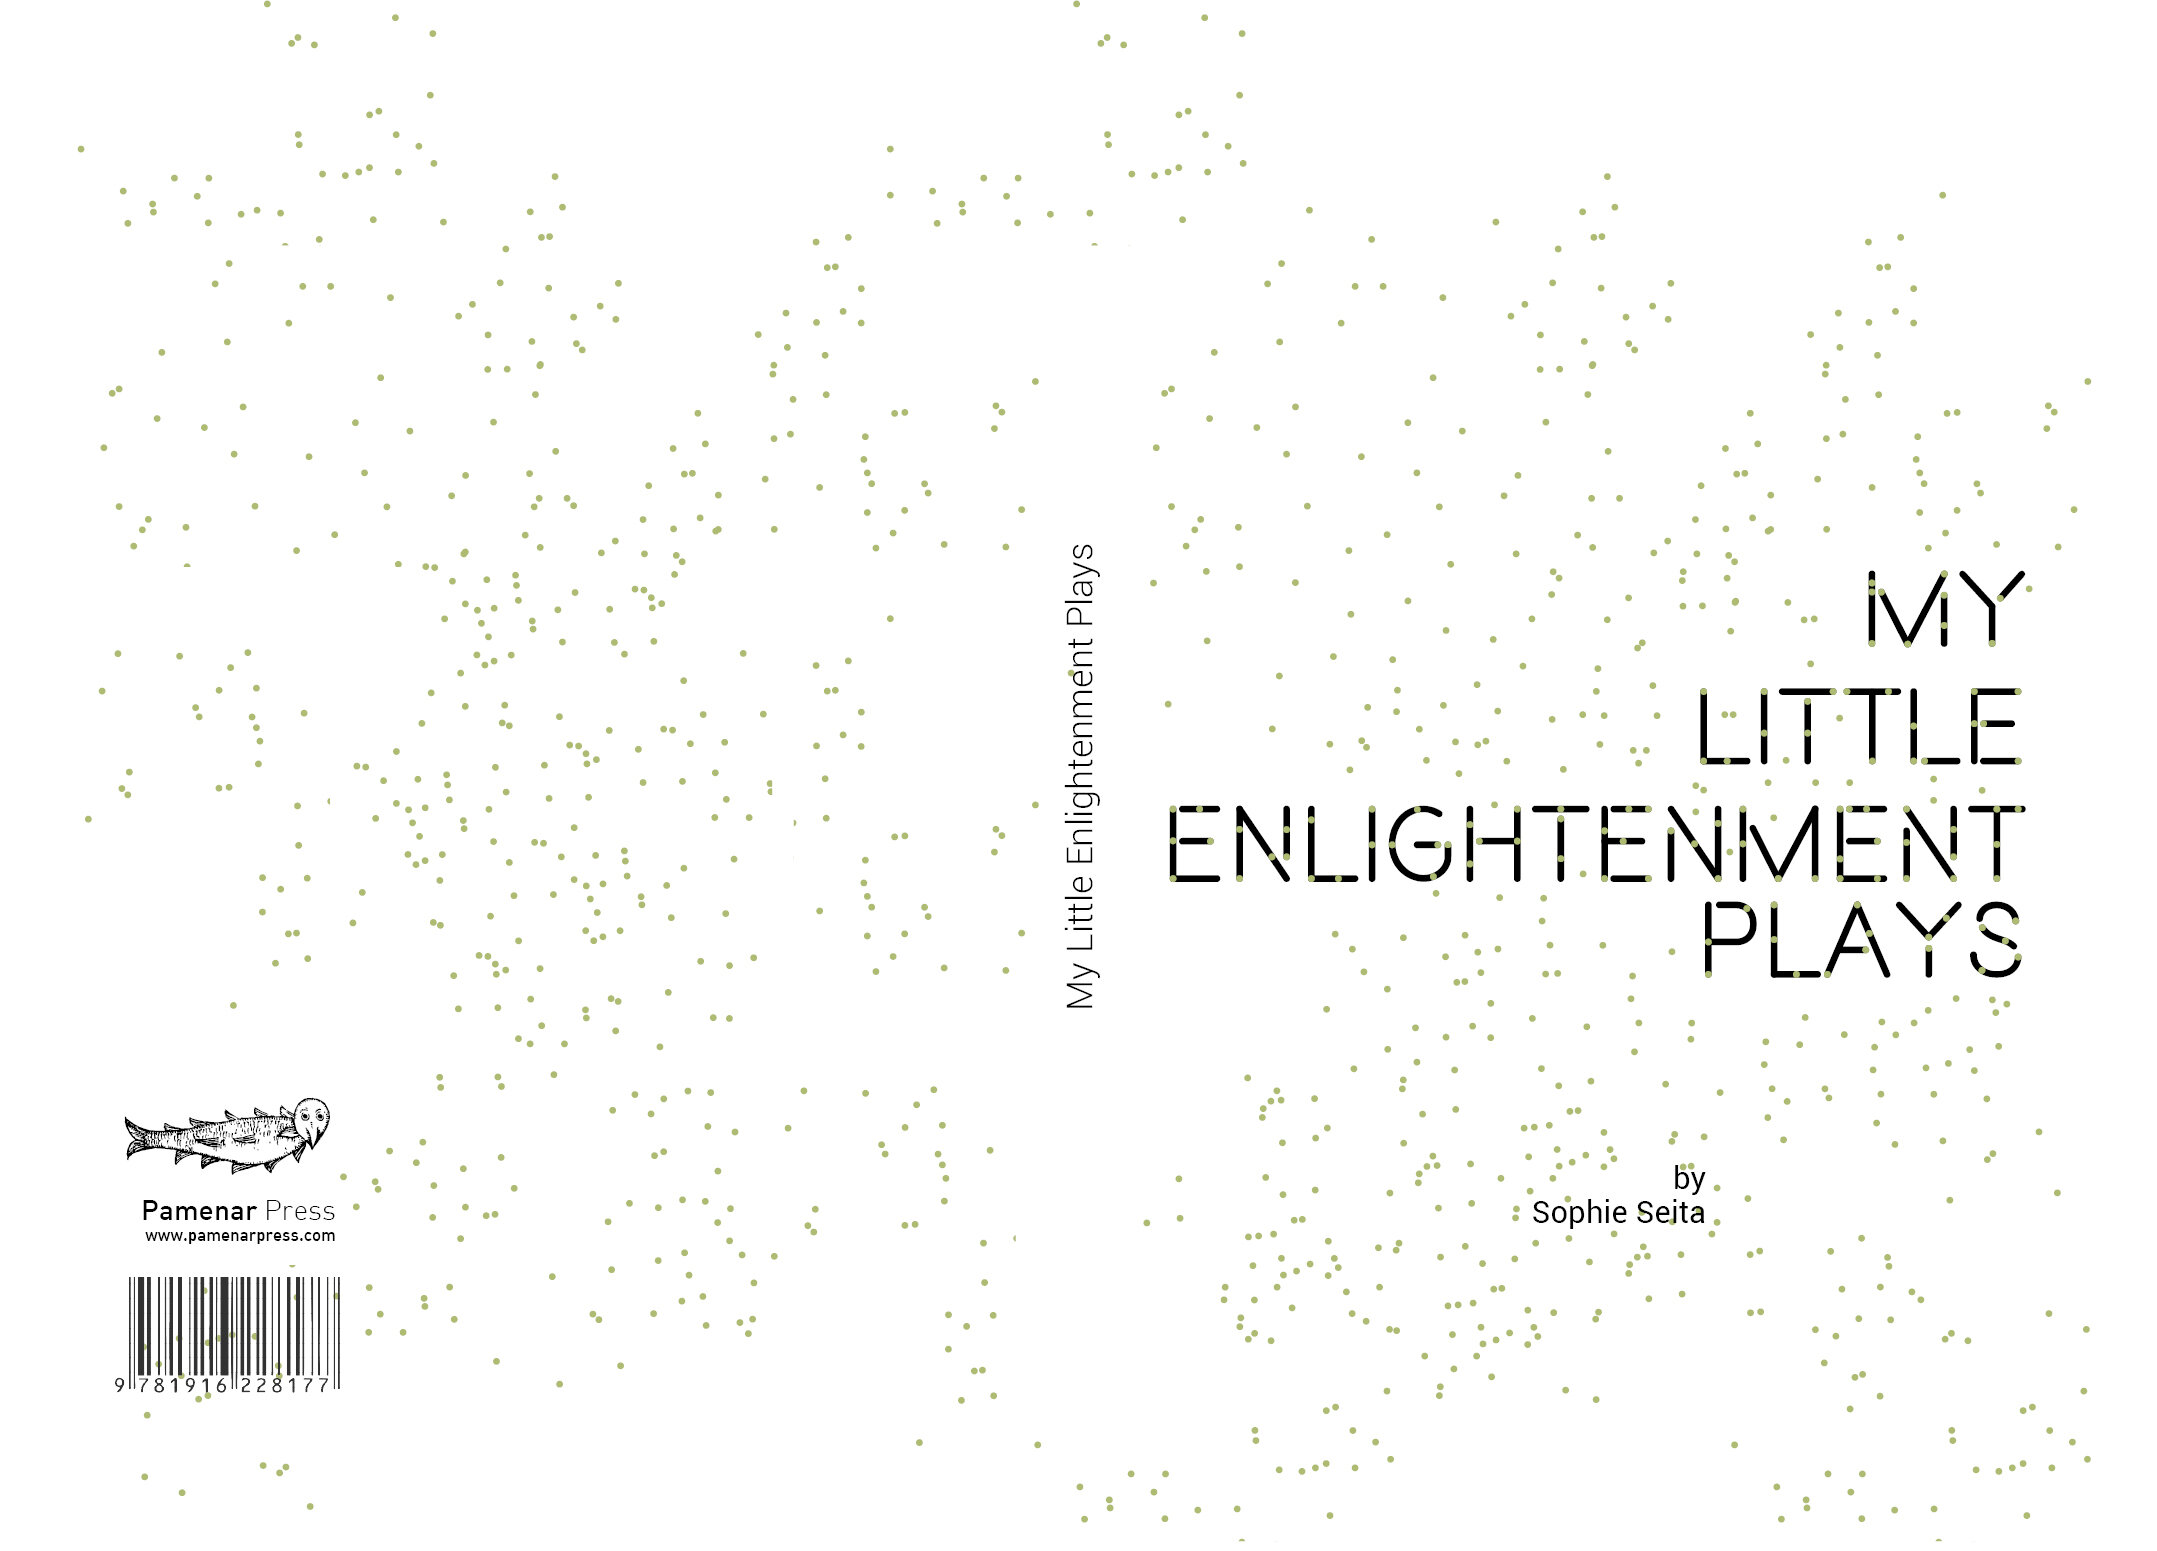 My Little Enlightenment Plays - Cover-1.jpg